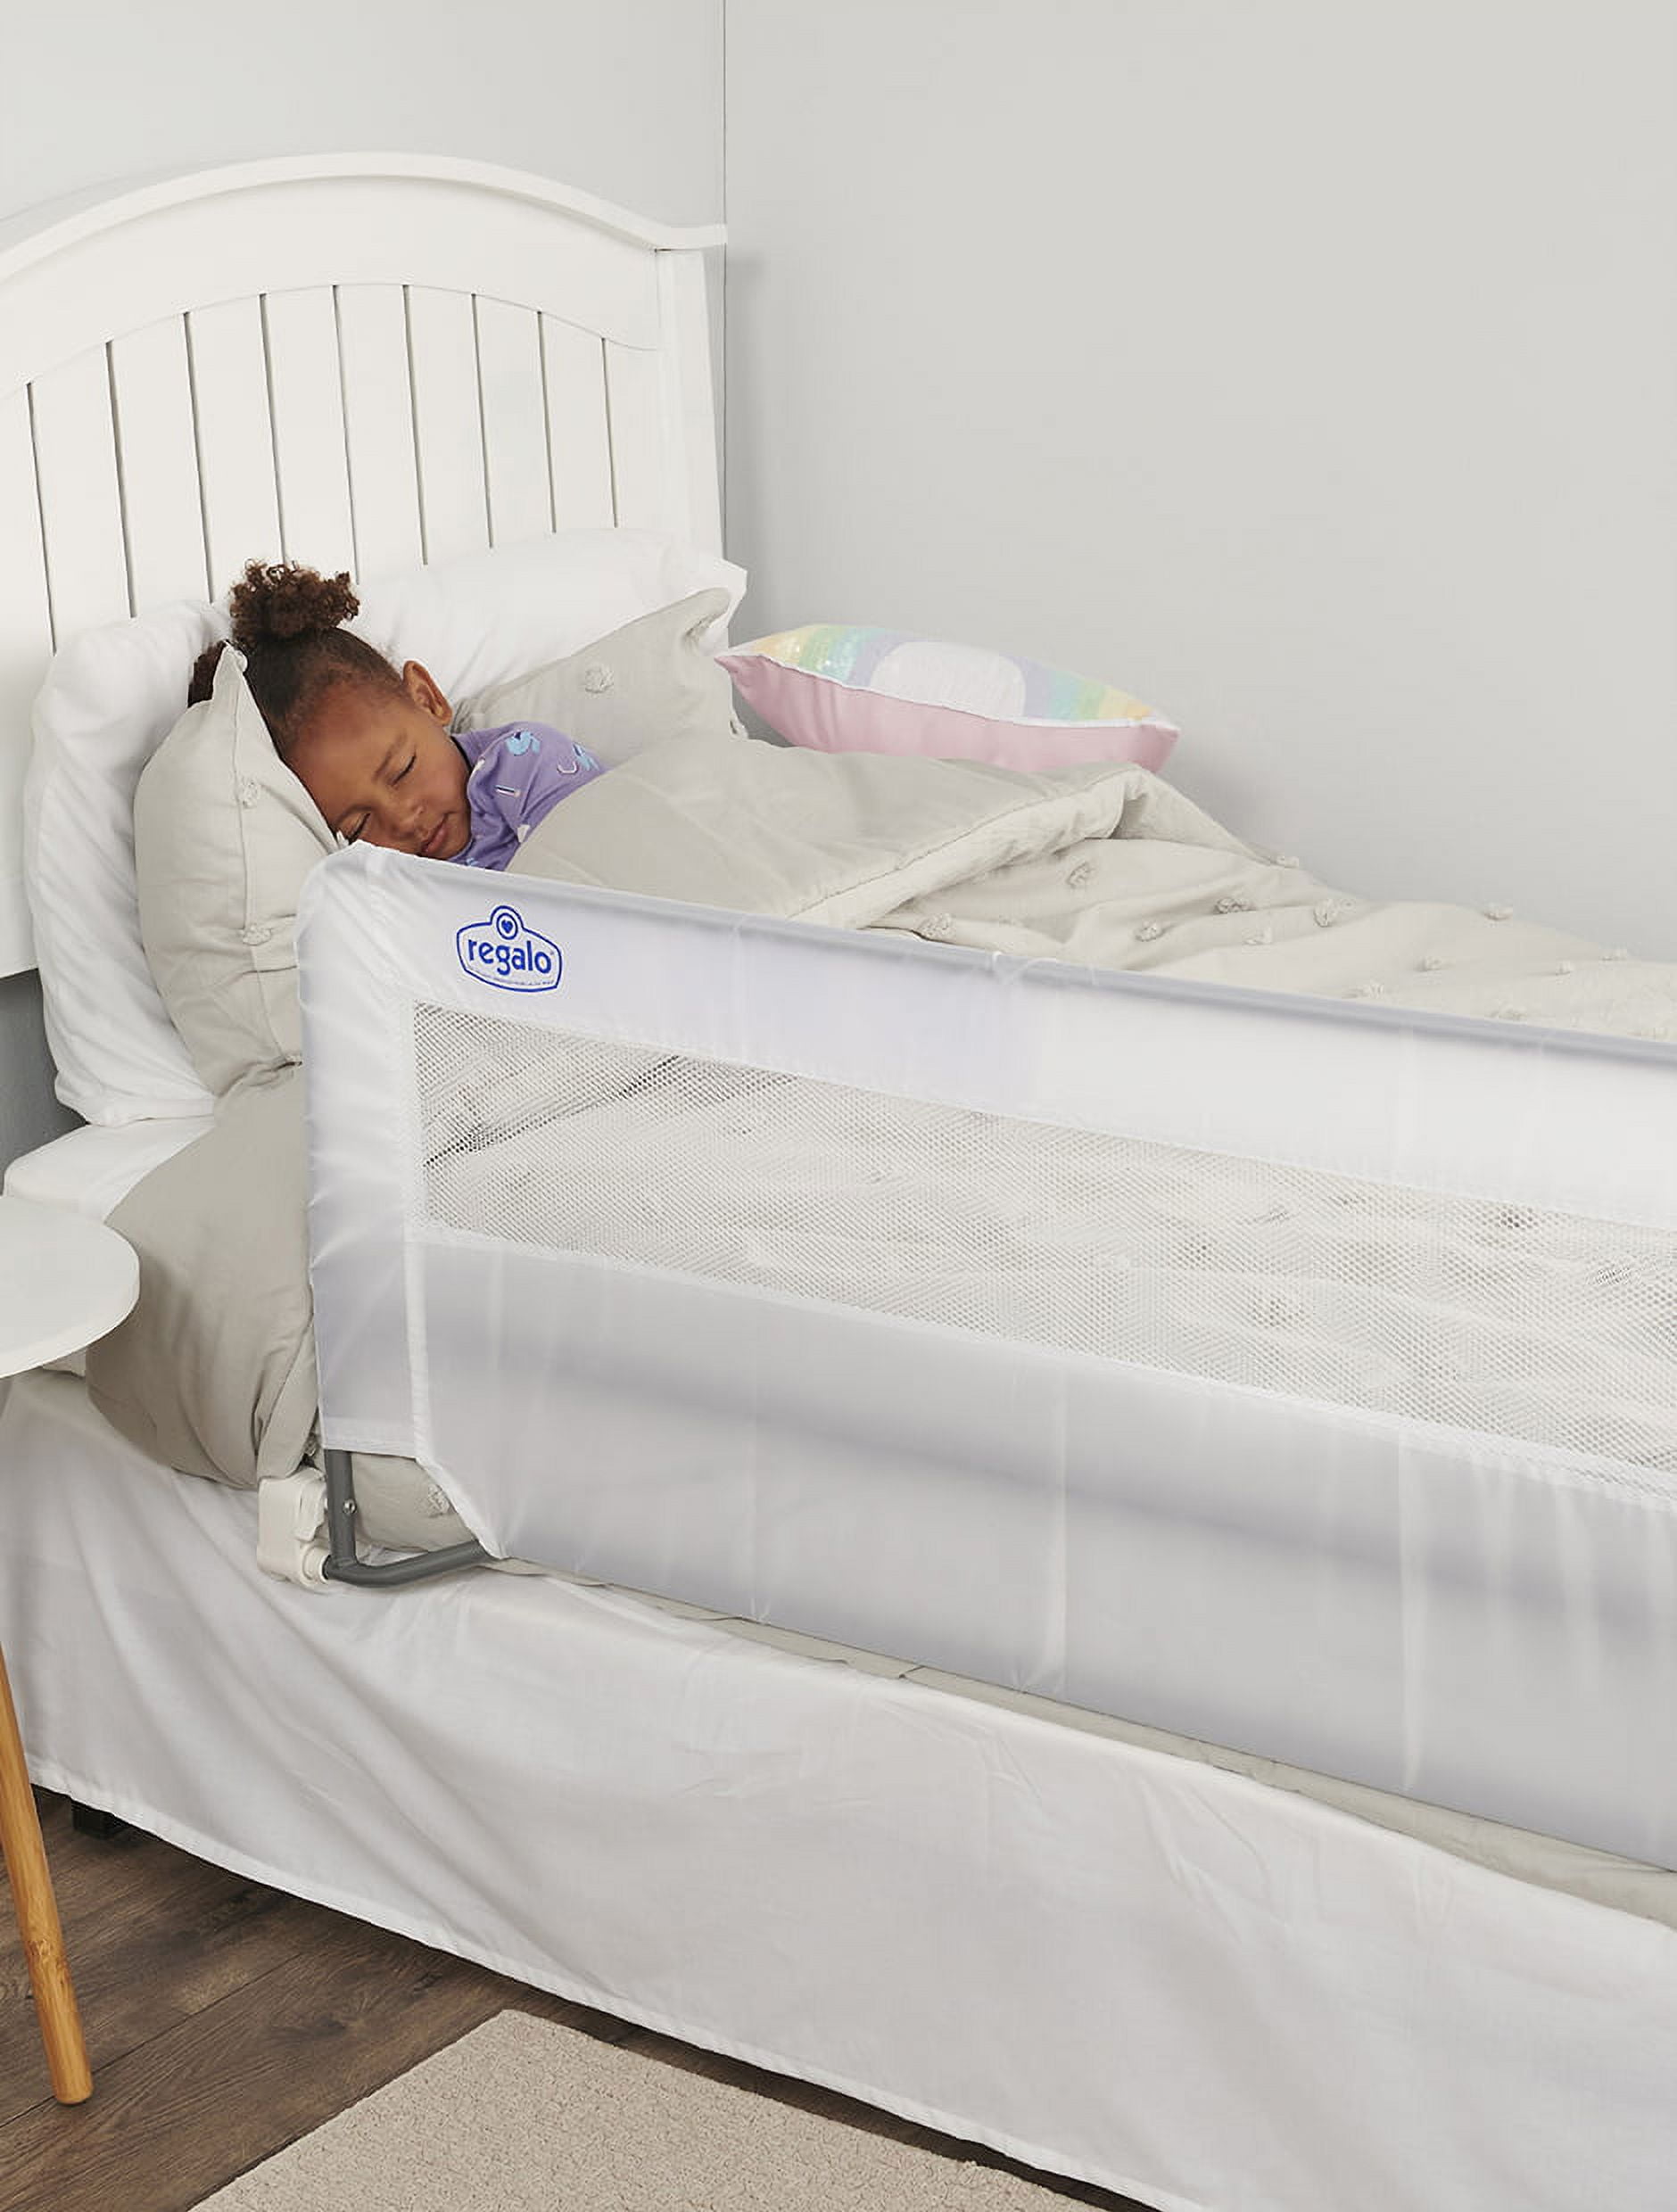 Best Bed Rails for Kids for Safe Sleeping - Today's Parent